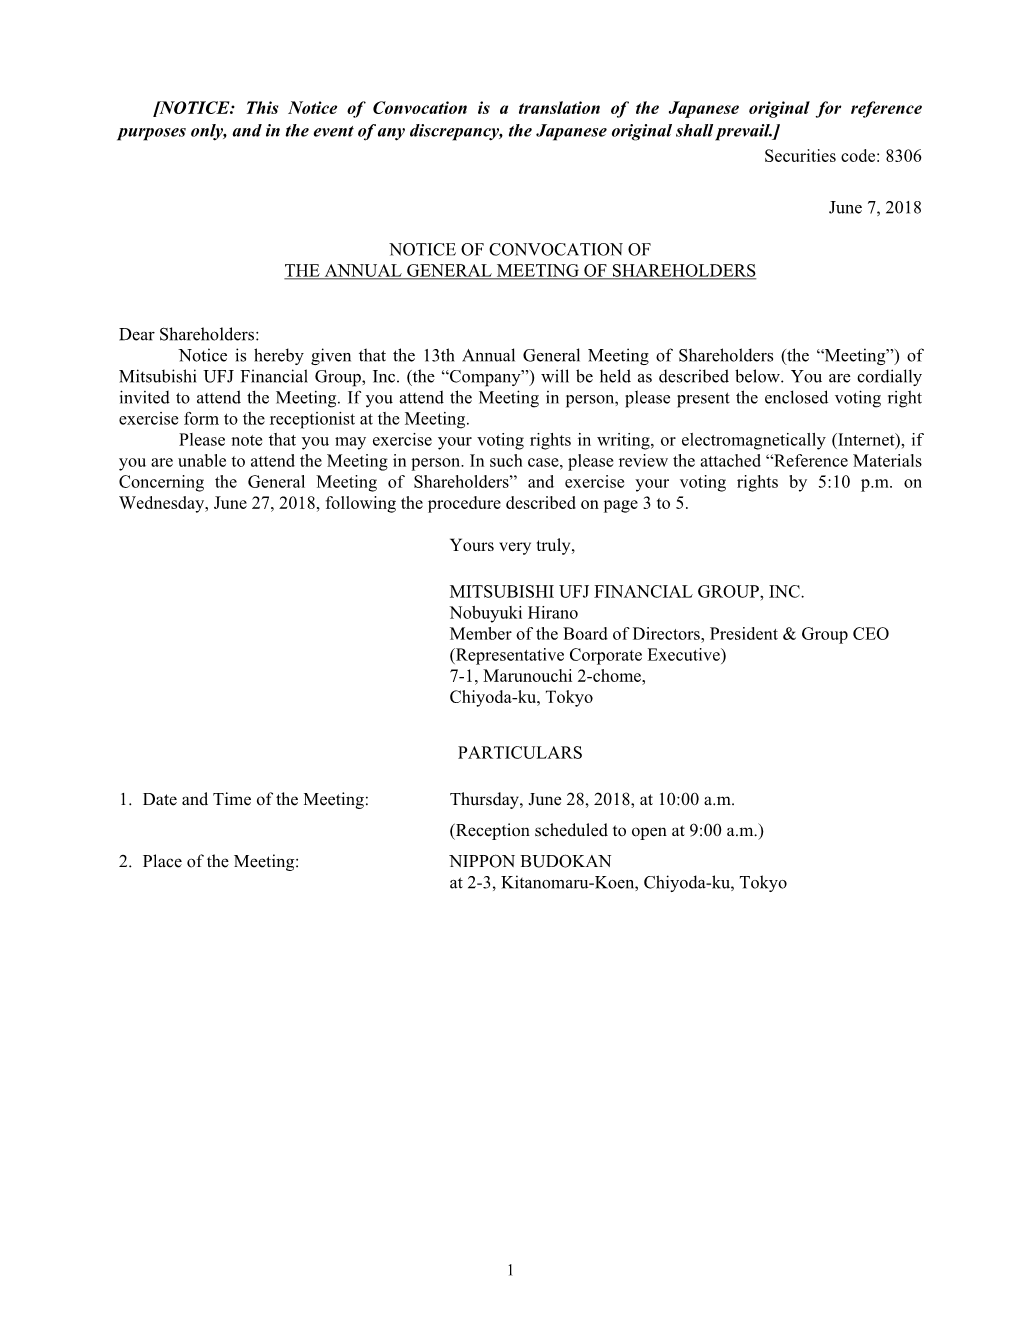 Notice of Convocation of the Annual General Meeting of Shareholders